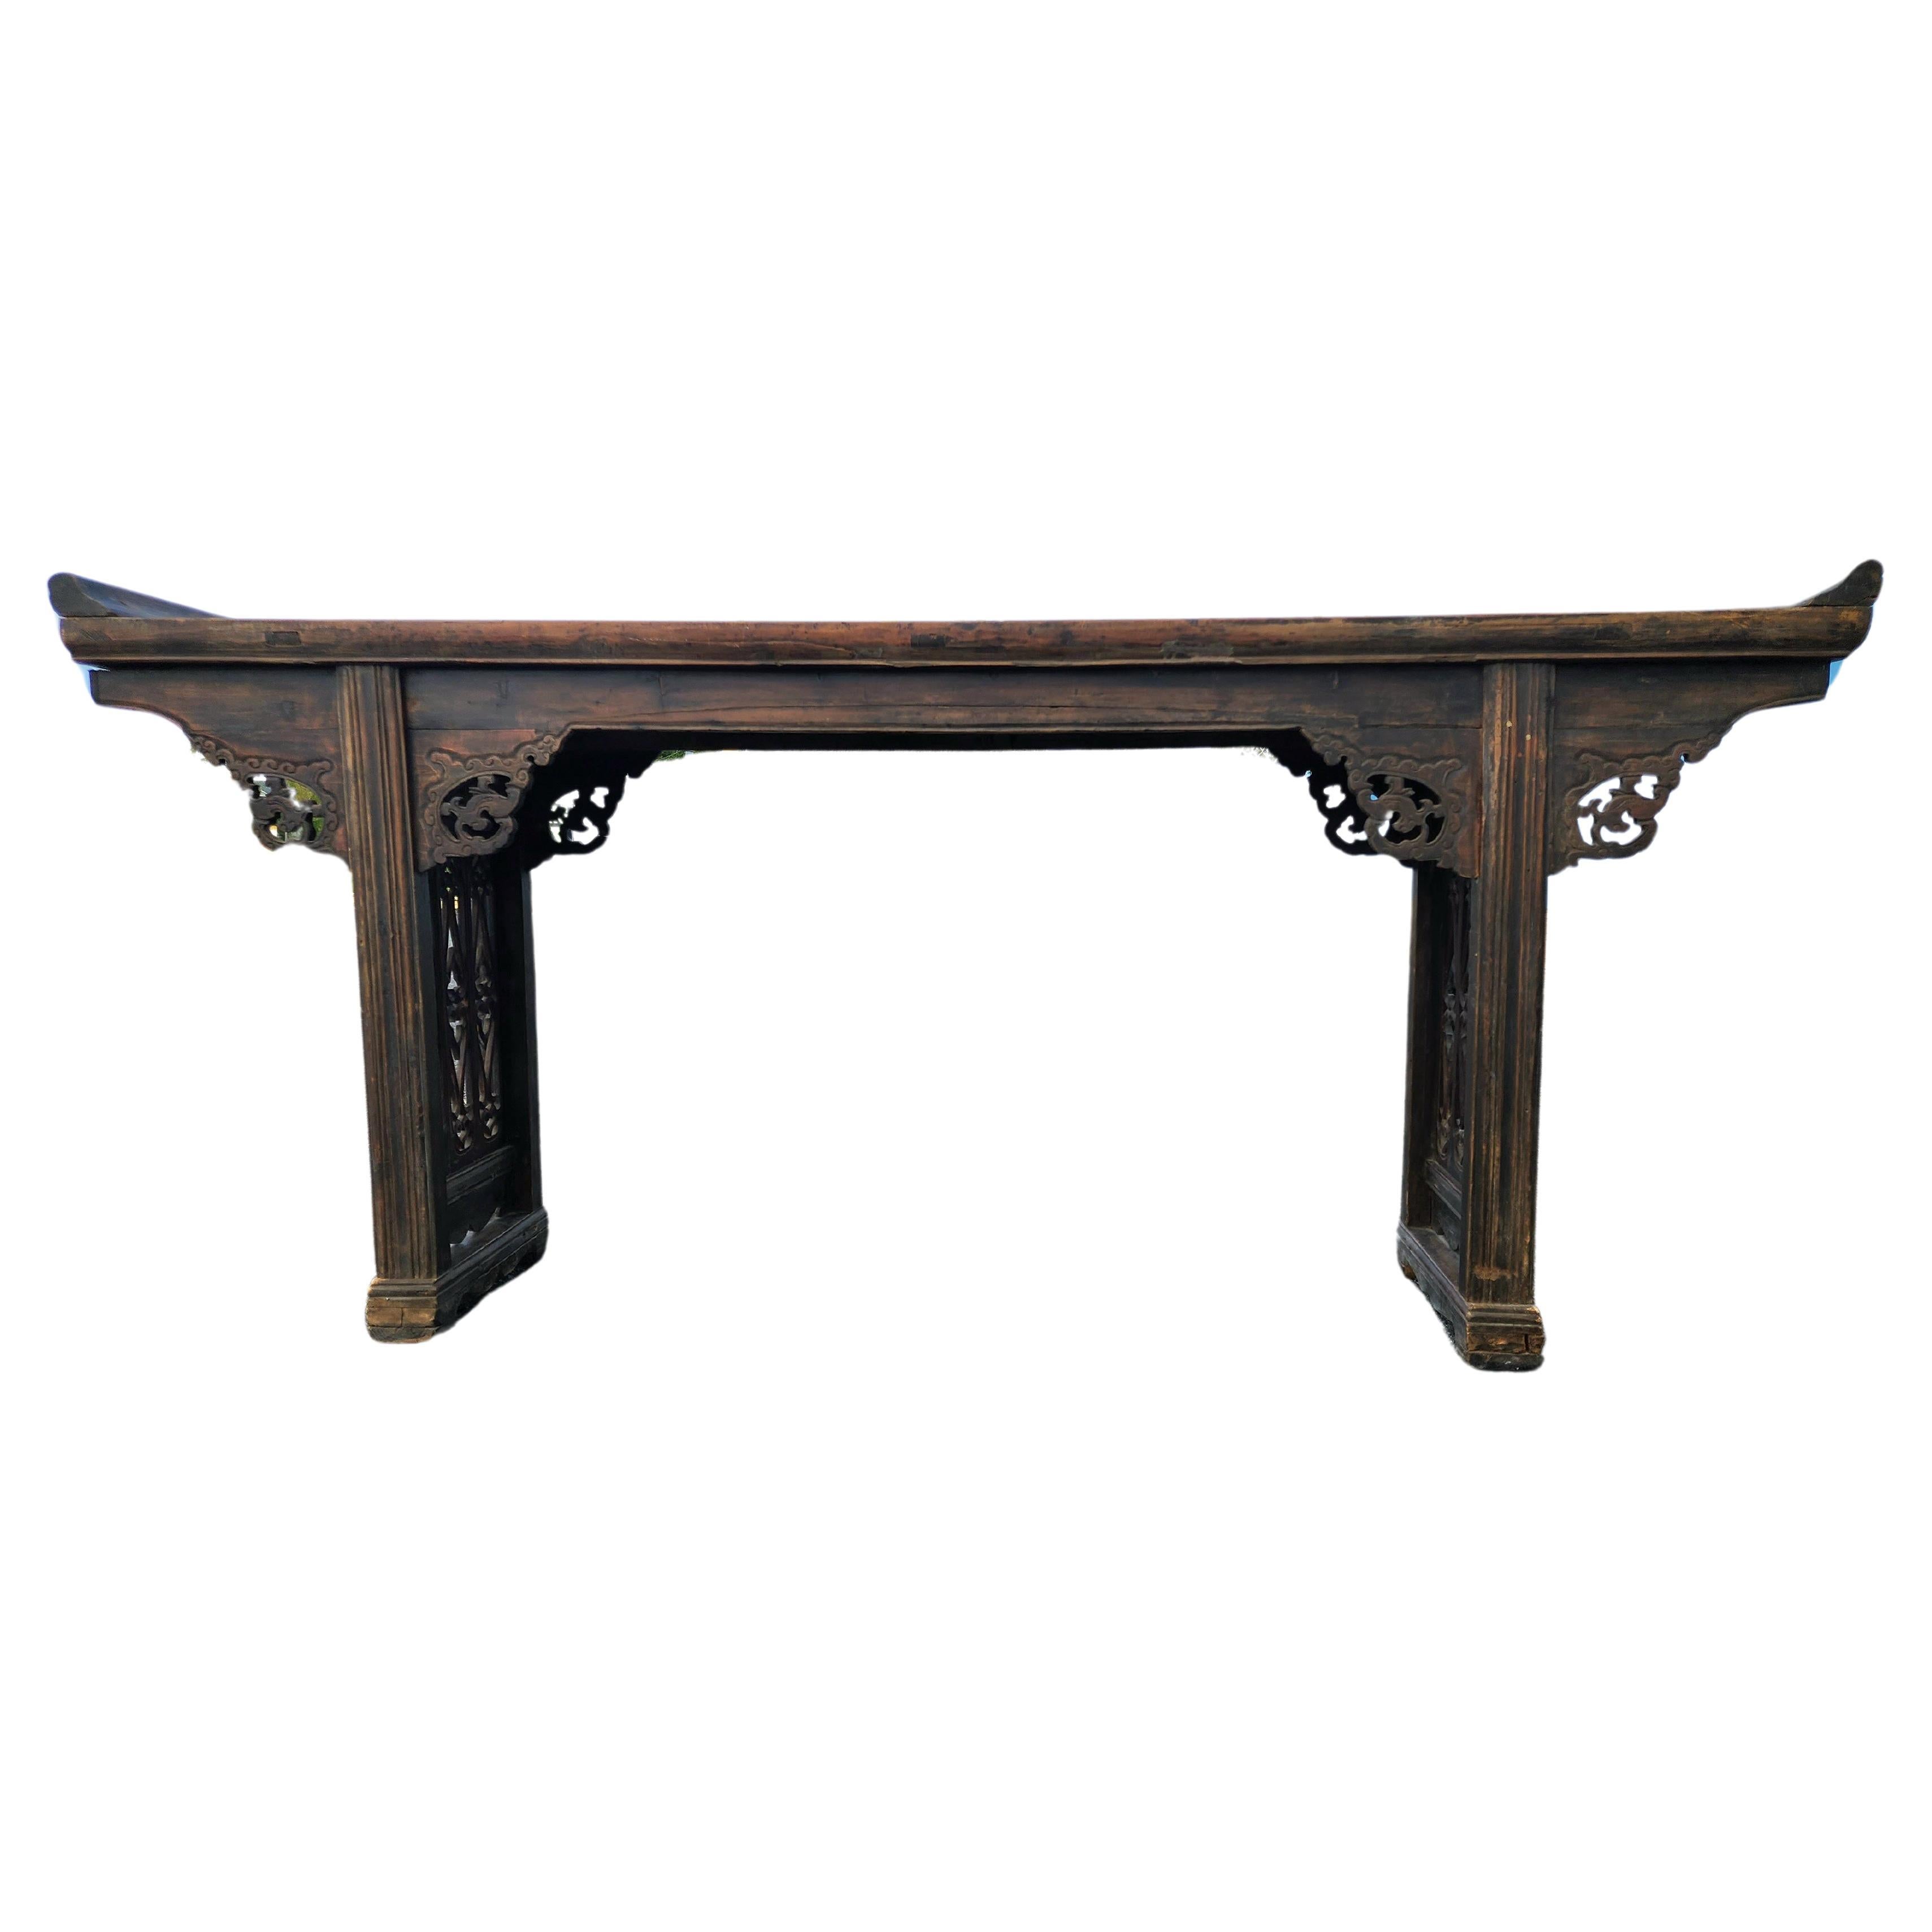 A large elm-wood altar or console table with everted flanges or 'qiaotou' (commonly called 